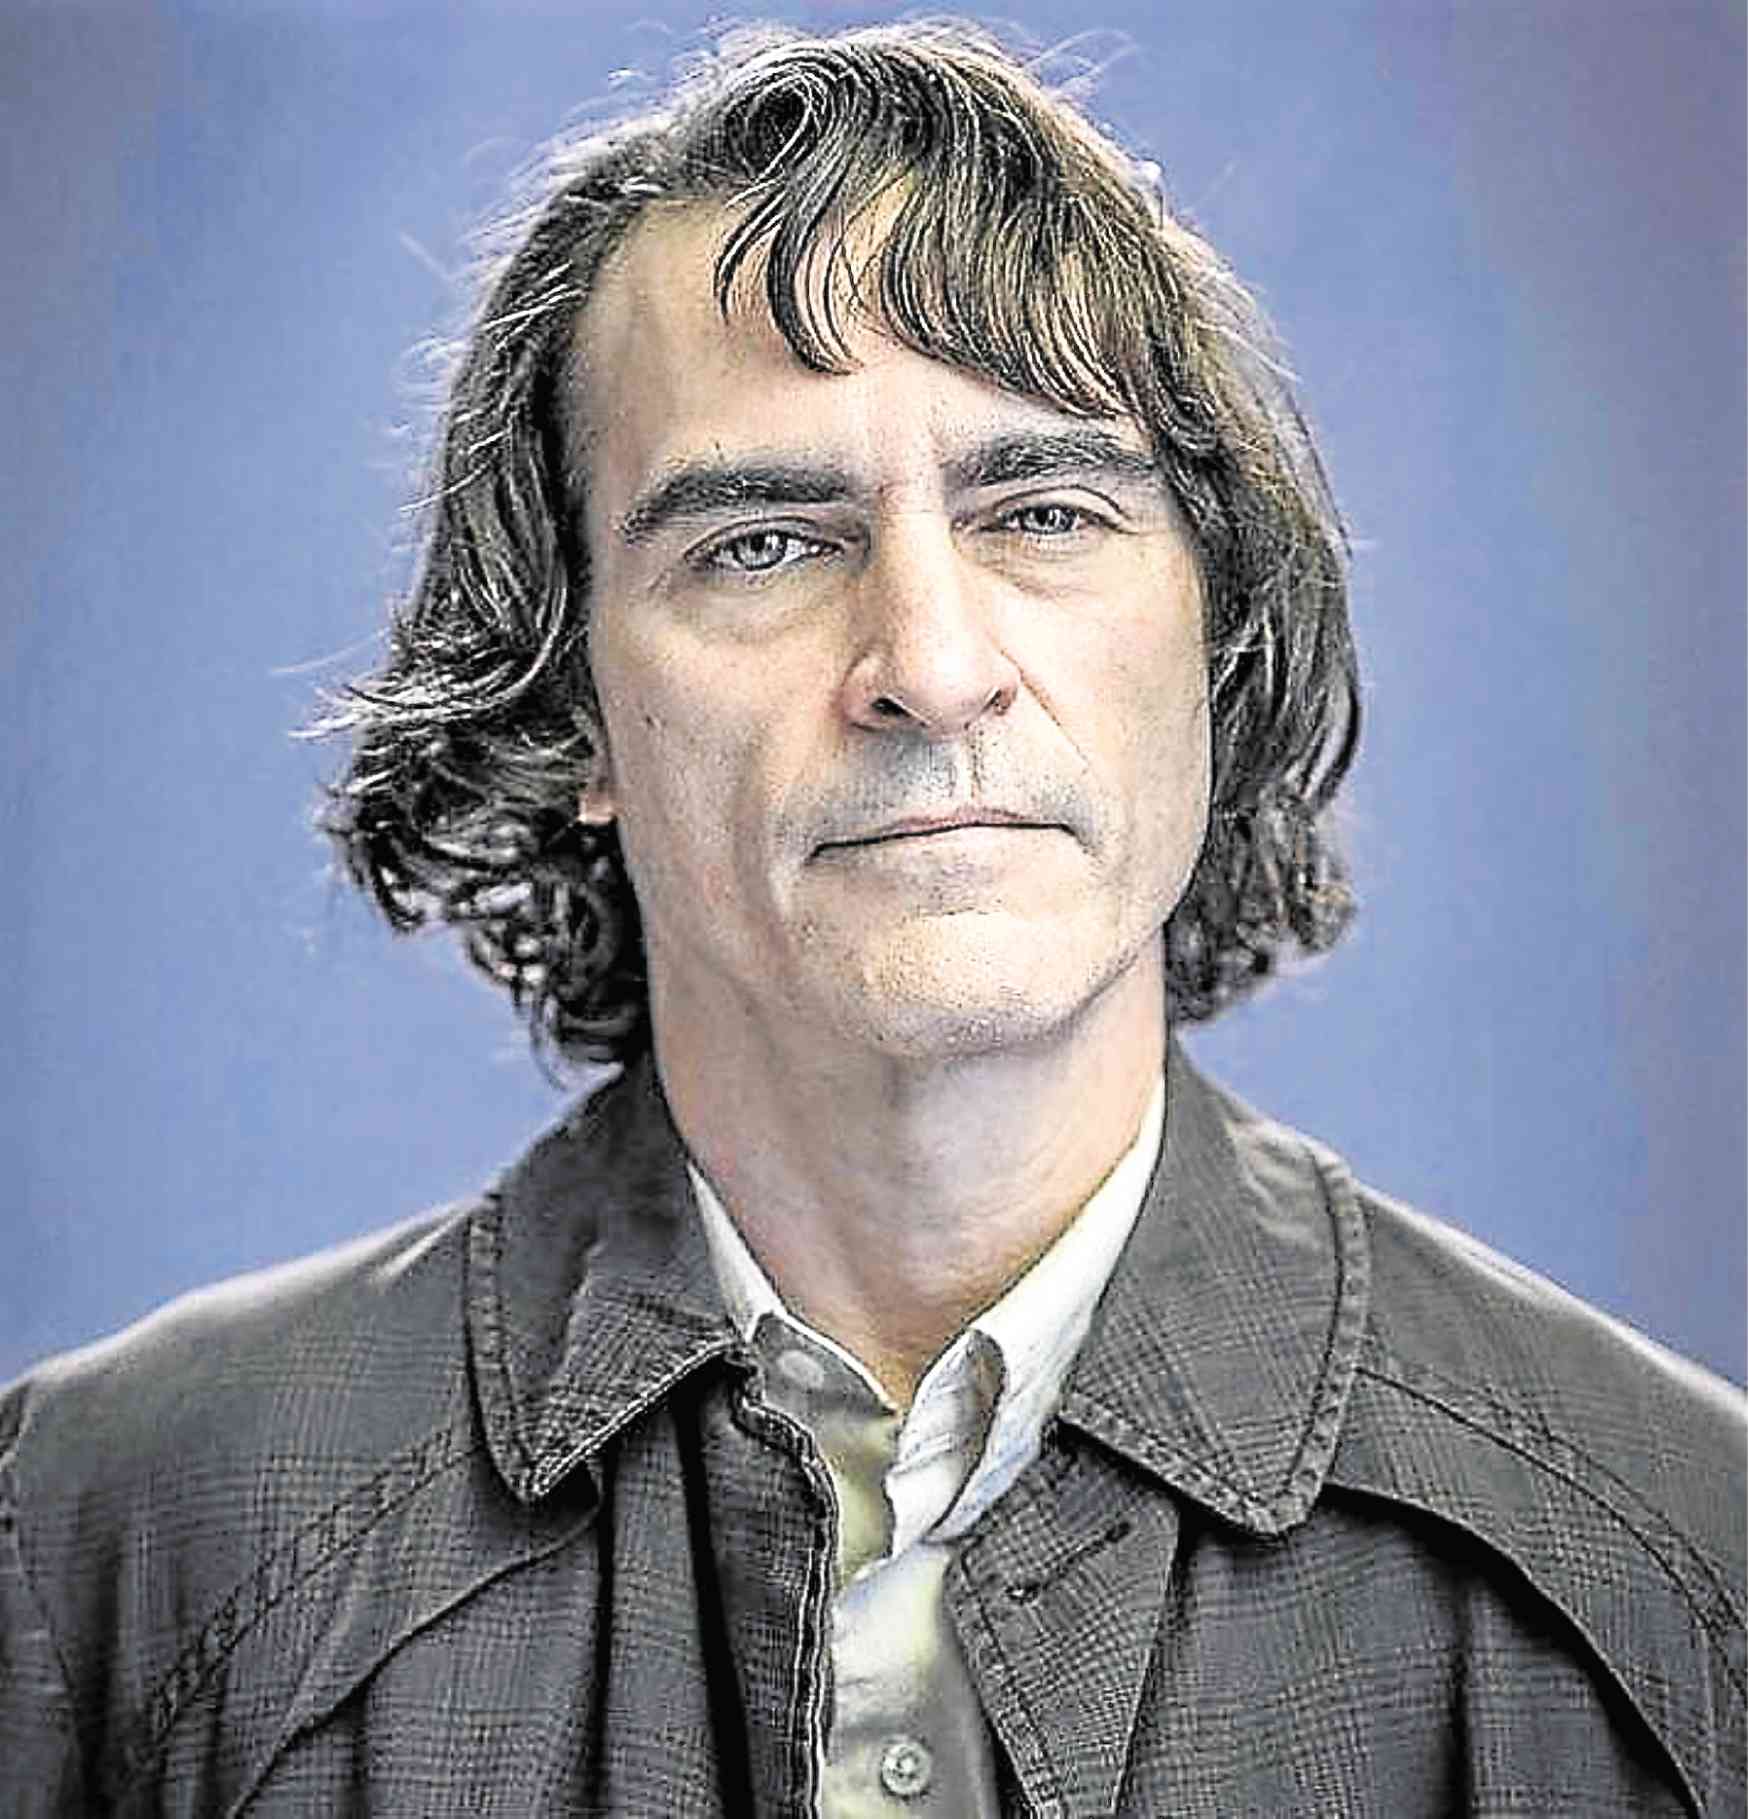 Joaquin Phoenix sheds tons of weight to play Joker | Inquirer Entertainment